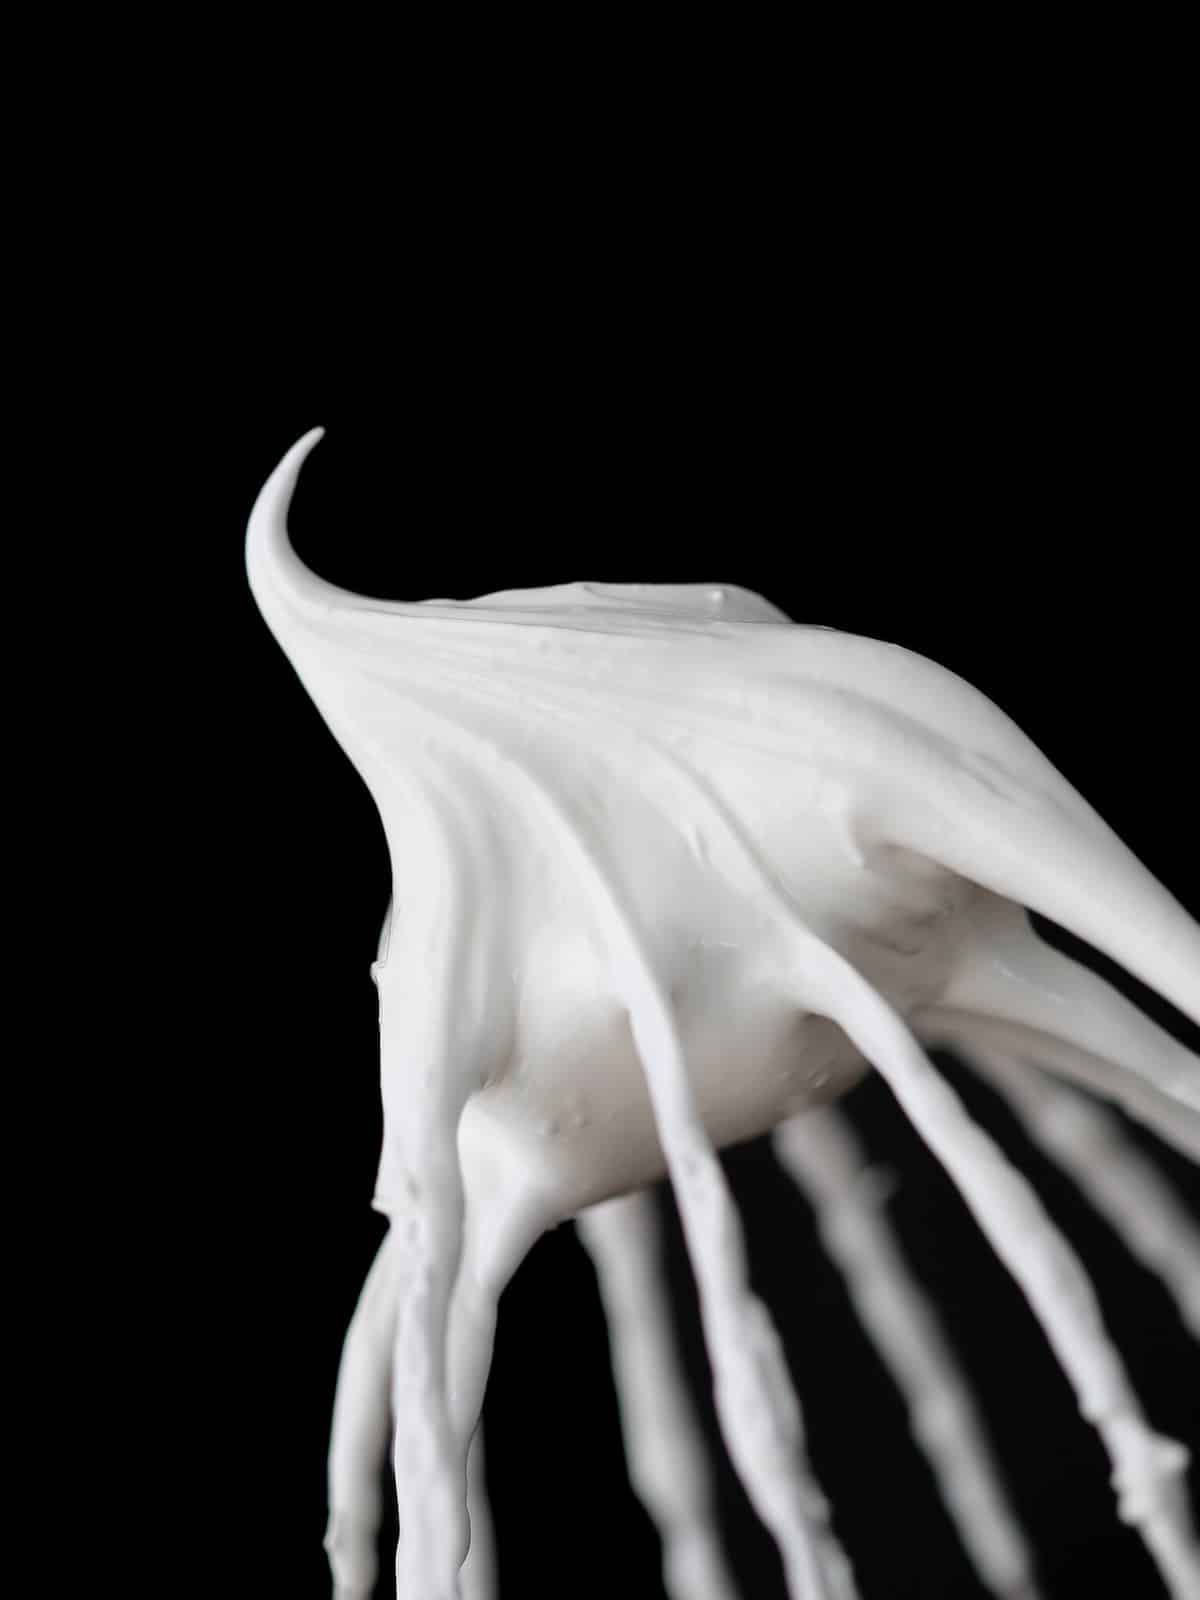 white marshmallow fluff on whisk with black background.